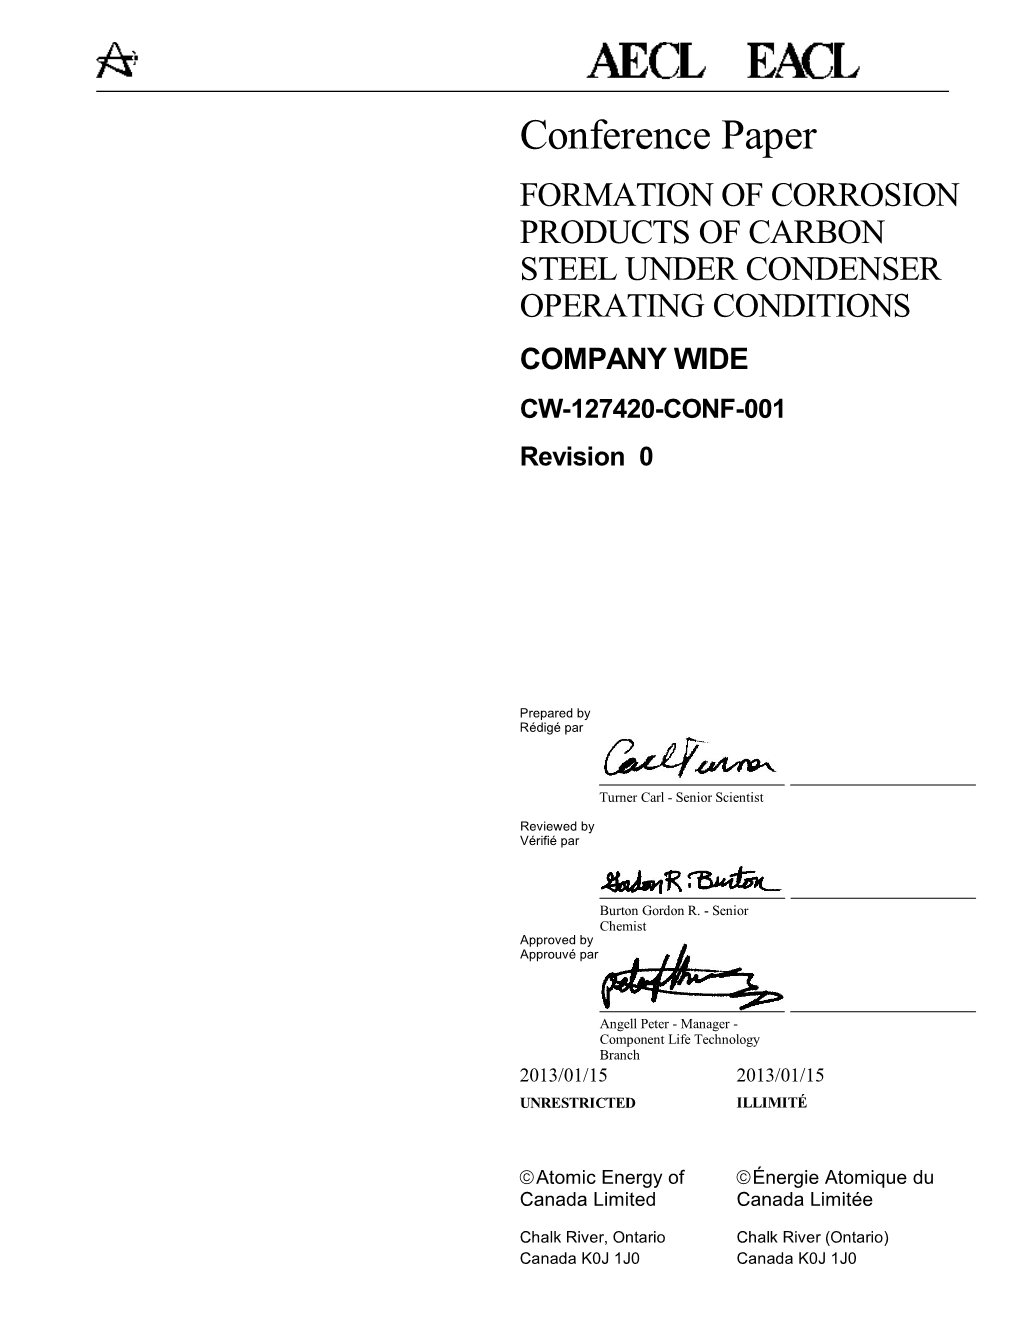 FORMATION of CORROSION PRODUCTS of CARBON STEEL UNDER CONDENSER OPERATING CONDITIONS COMPANY WIDE CW-127420-CONF-001 Revision 0